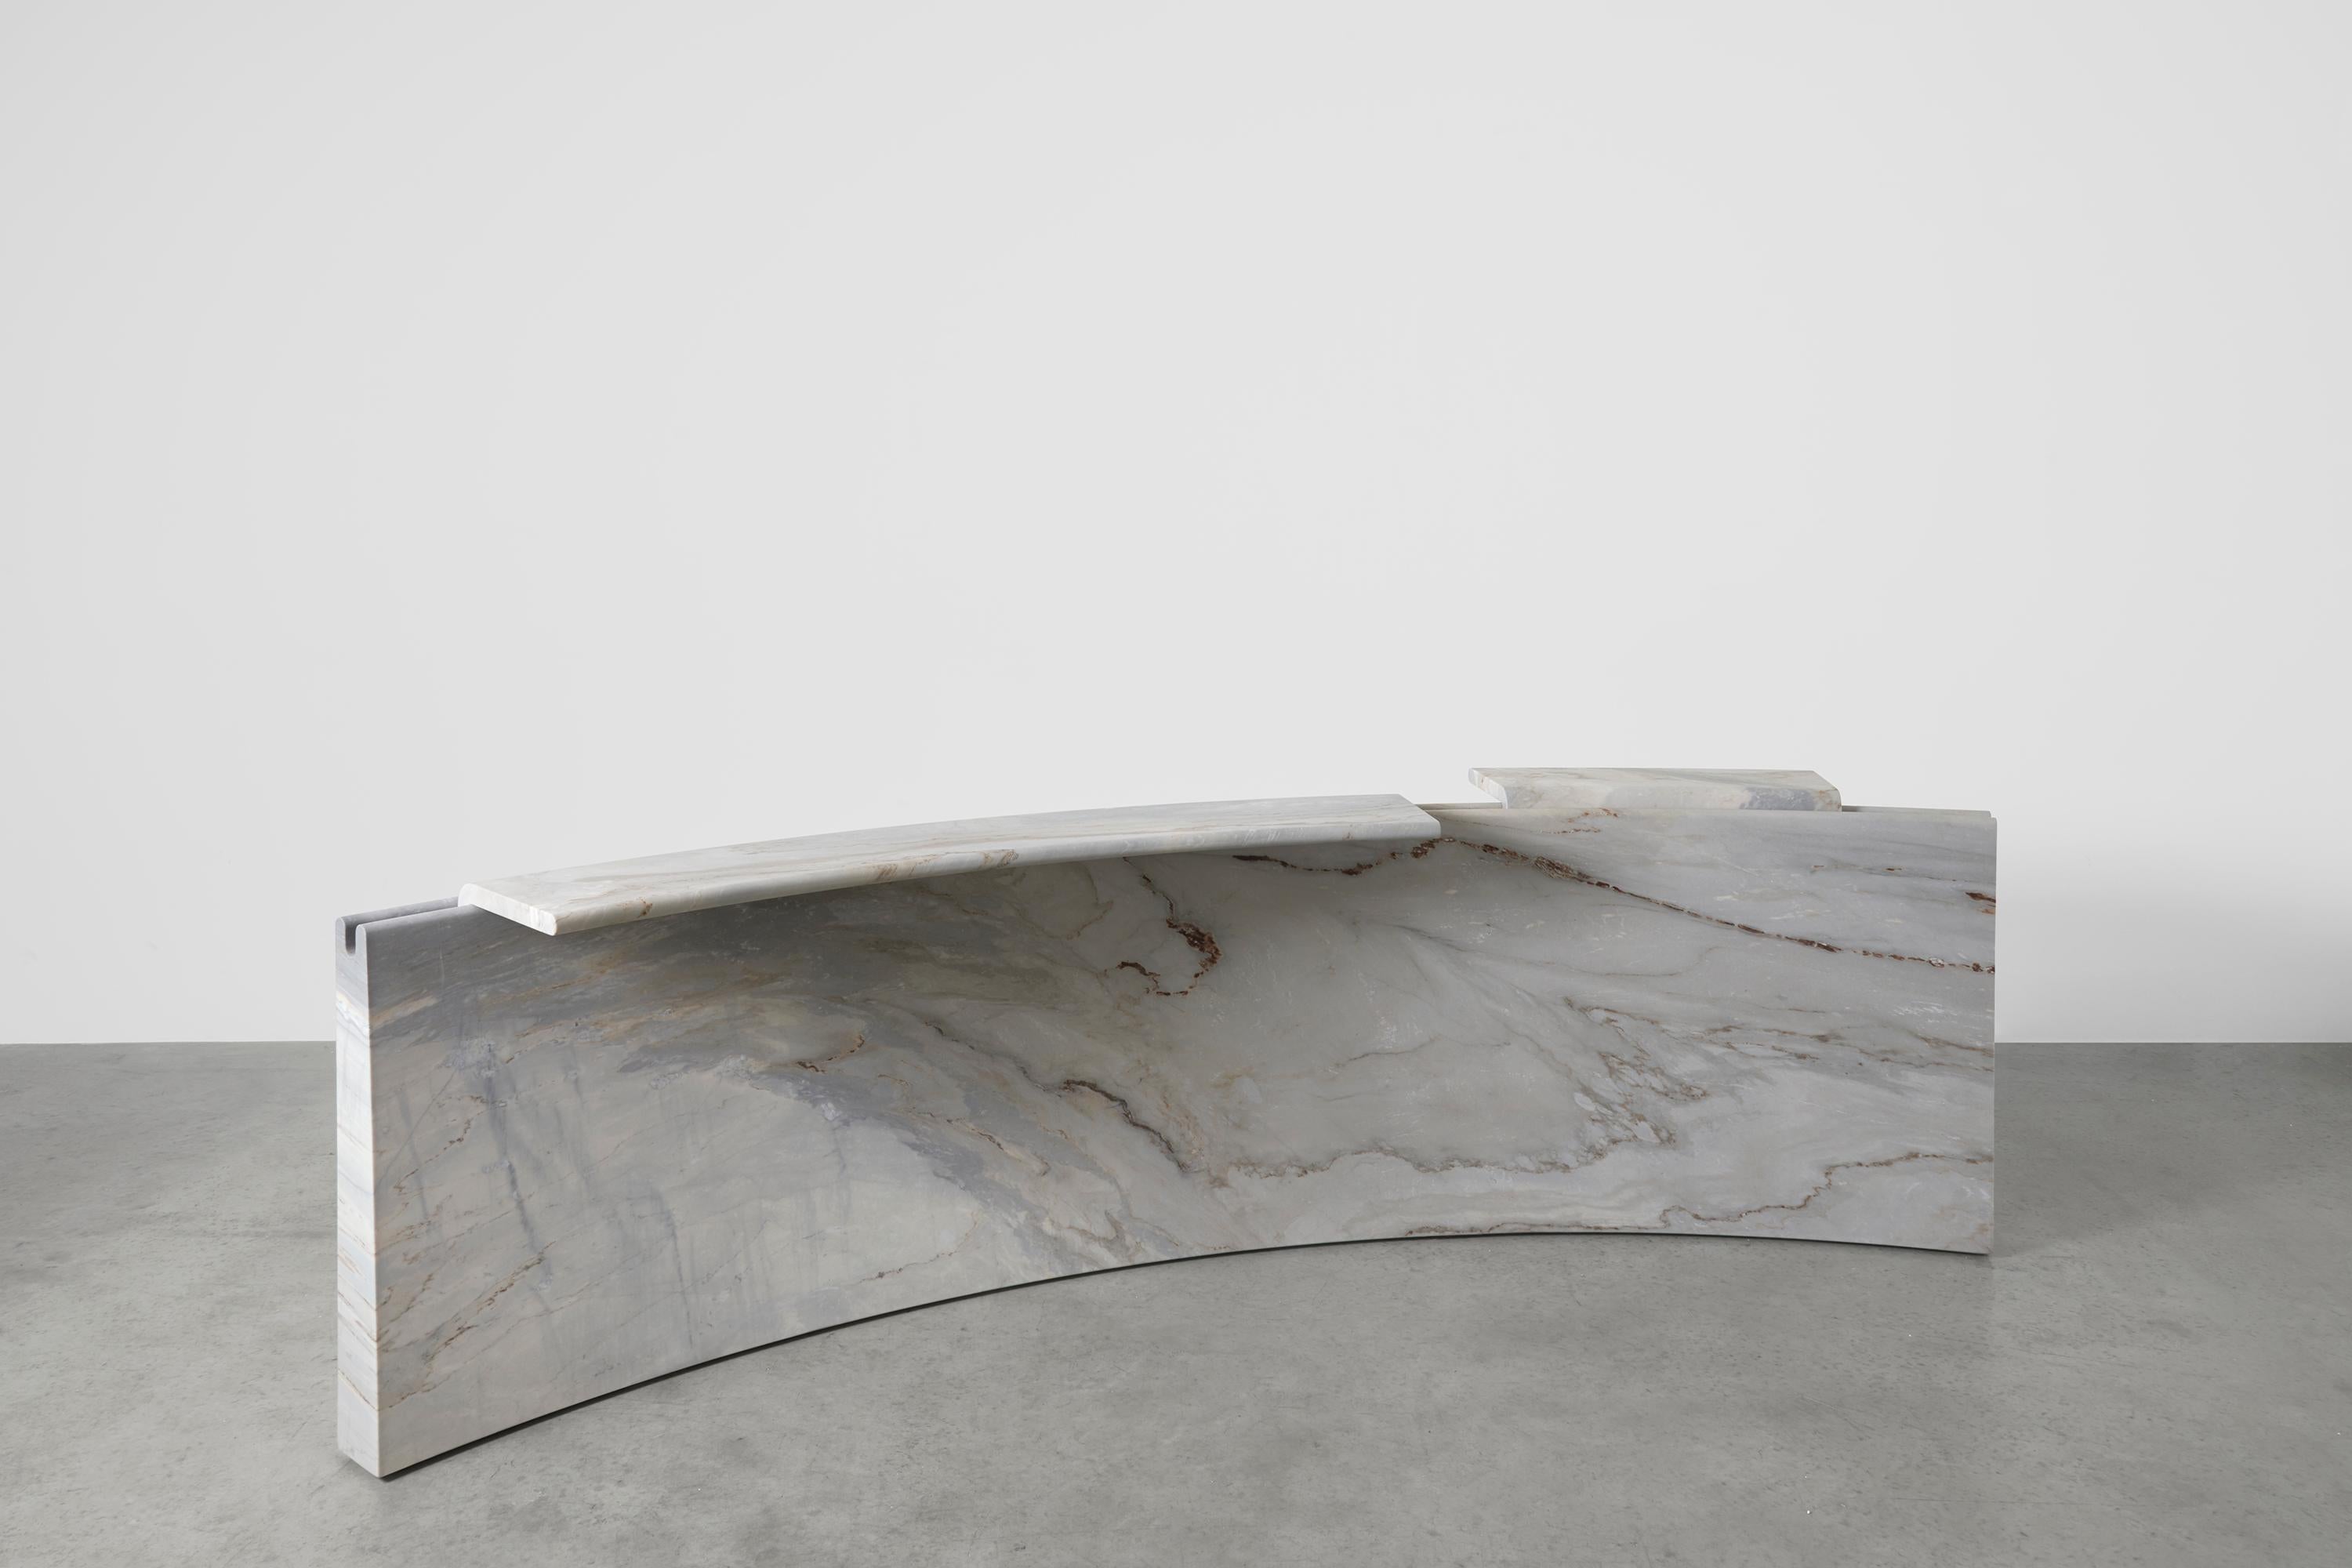 Large Palissandro Bluette Marble MASS by Agglomerati x Fred Ganim
Dimensions: W 279 x D 76 x H 80 cm
Materials: Palissandro Bluette Marble

Grounded by its weight, the sheer mass of the material uses gravity as a structural force, cantilevering